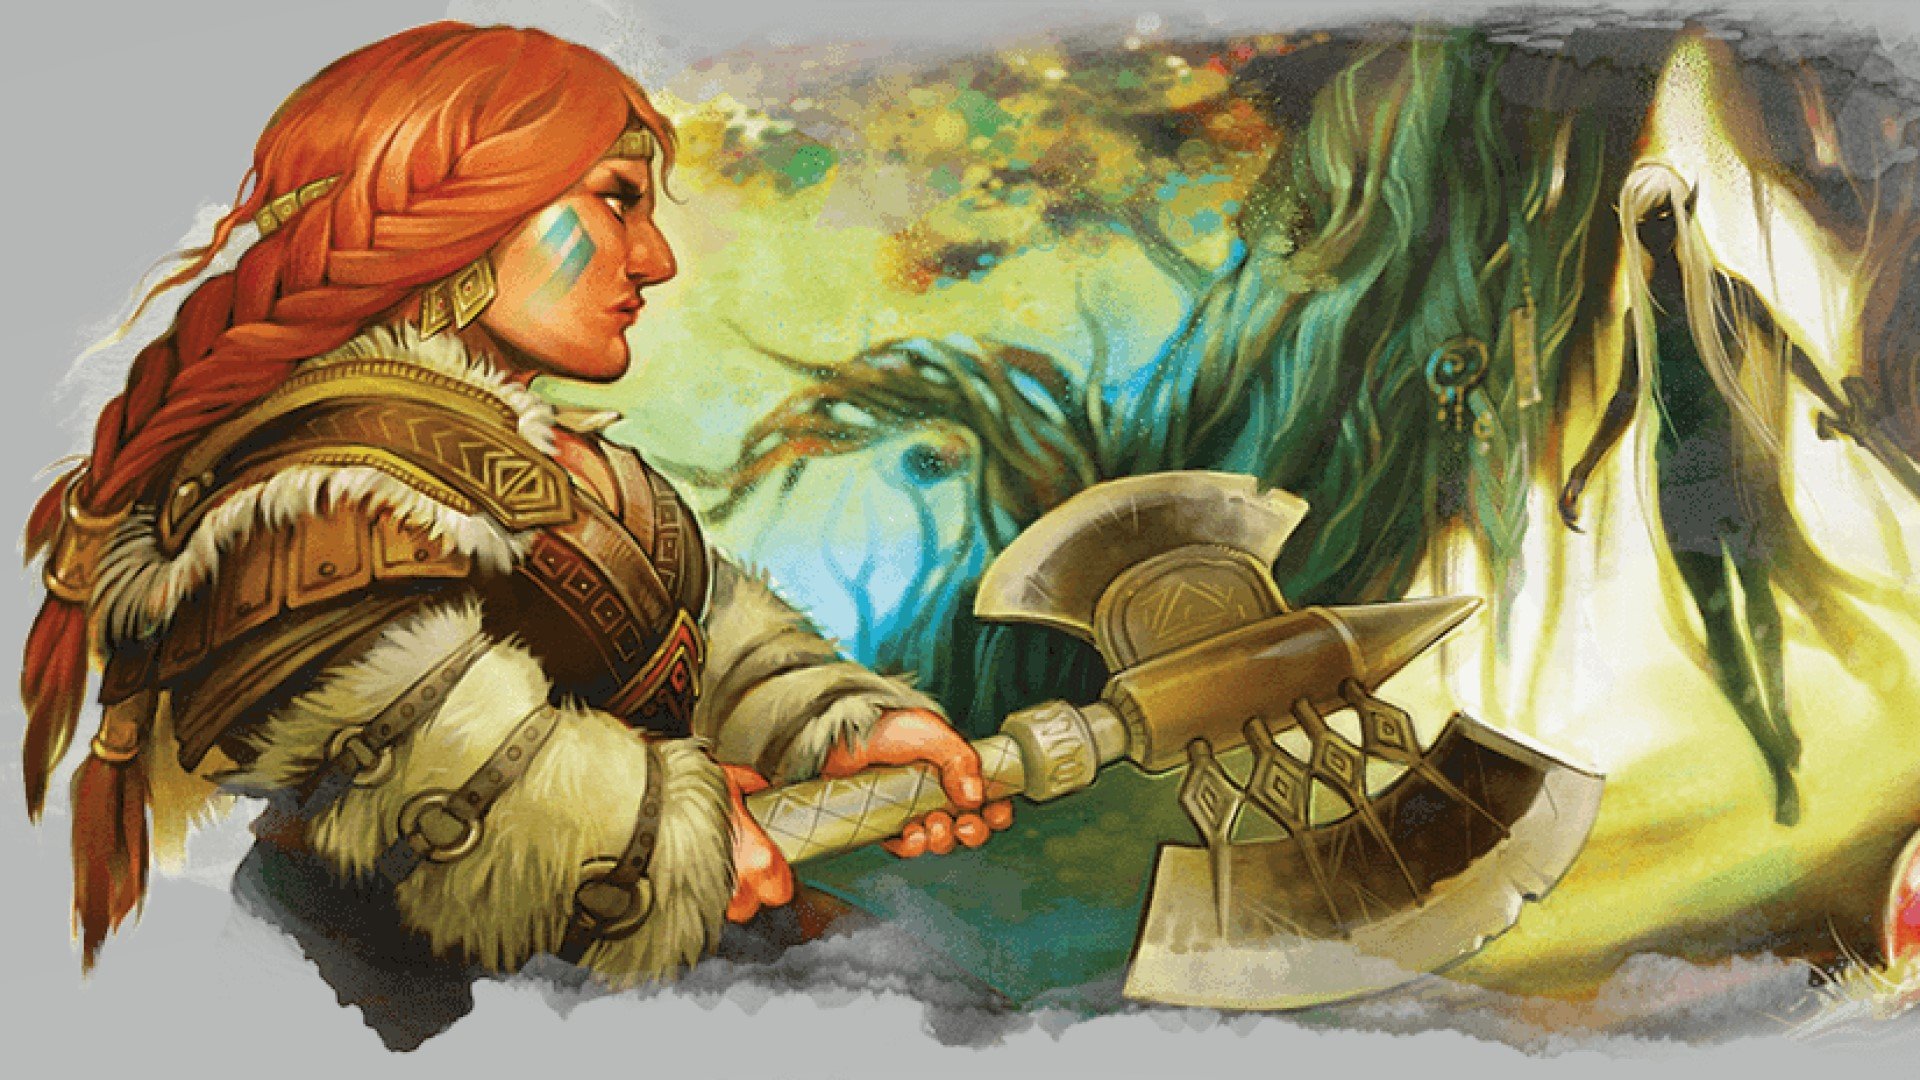 DnD Barbarian 5E class guide - Wizards of the Coast artwork showing a female dwarf barbarian character